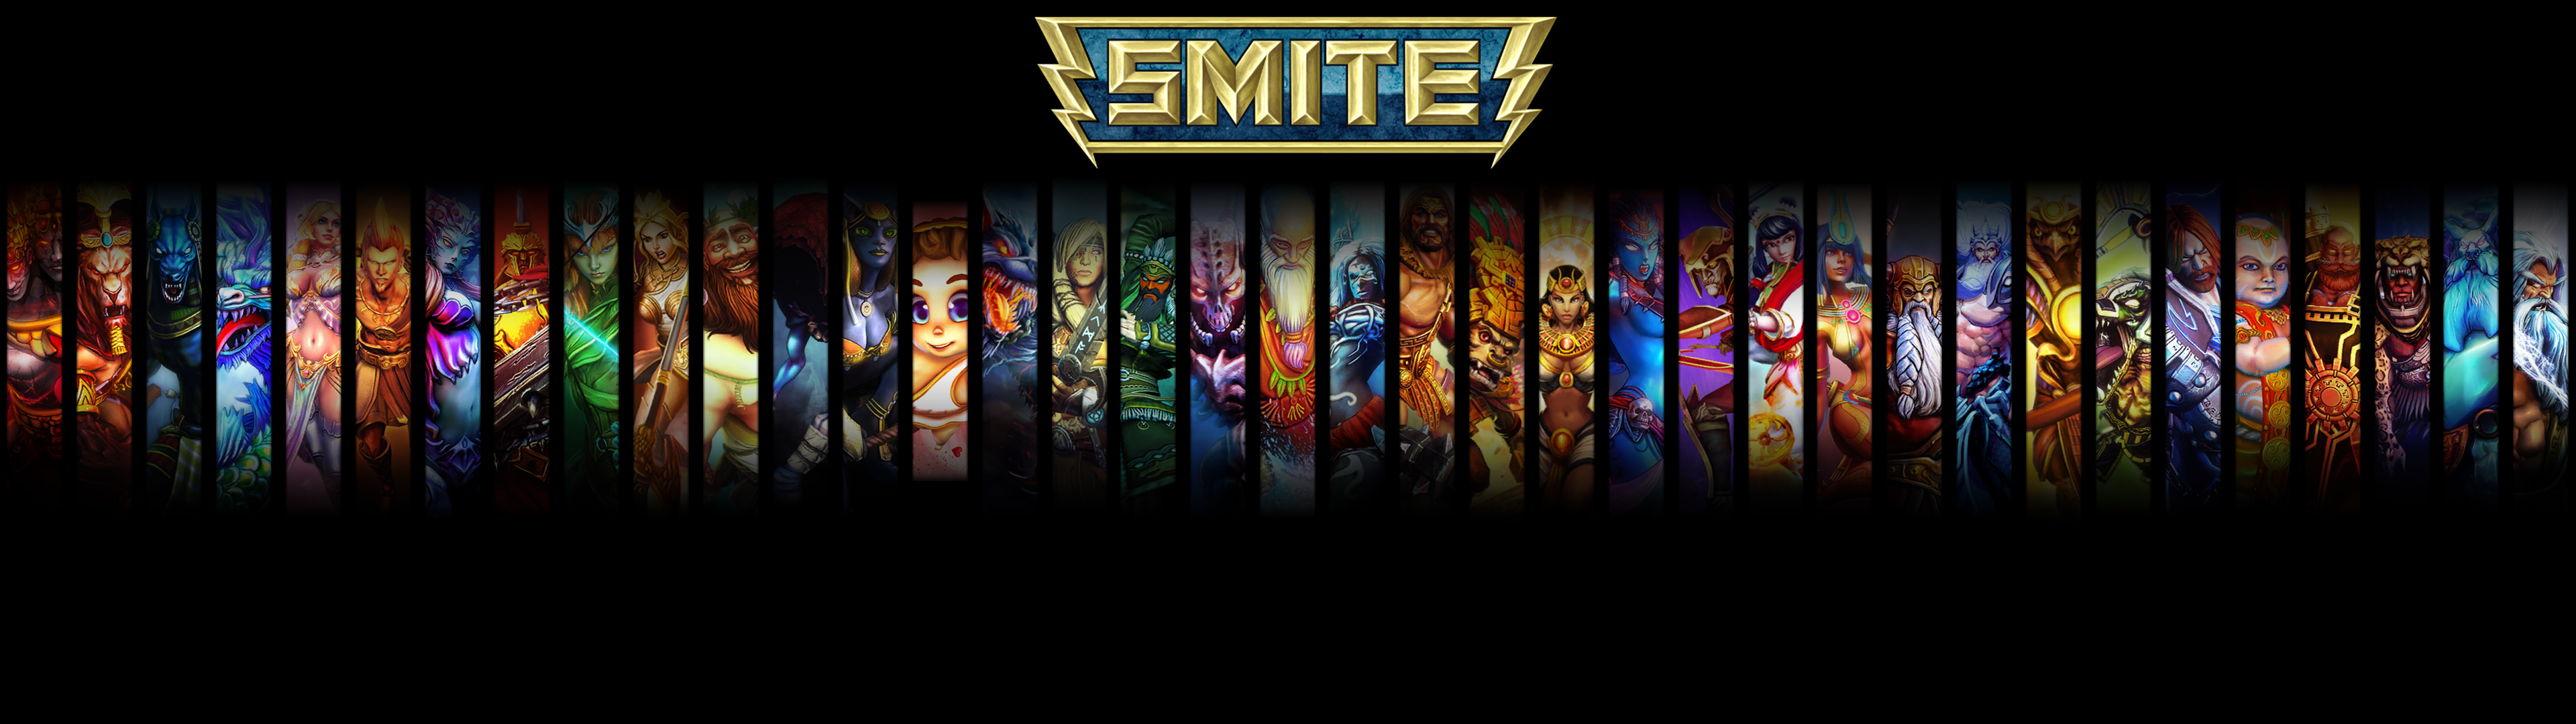 Smite Dual Monitor Wallpapers